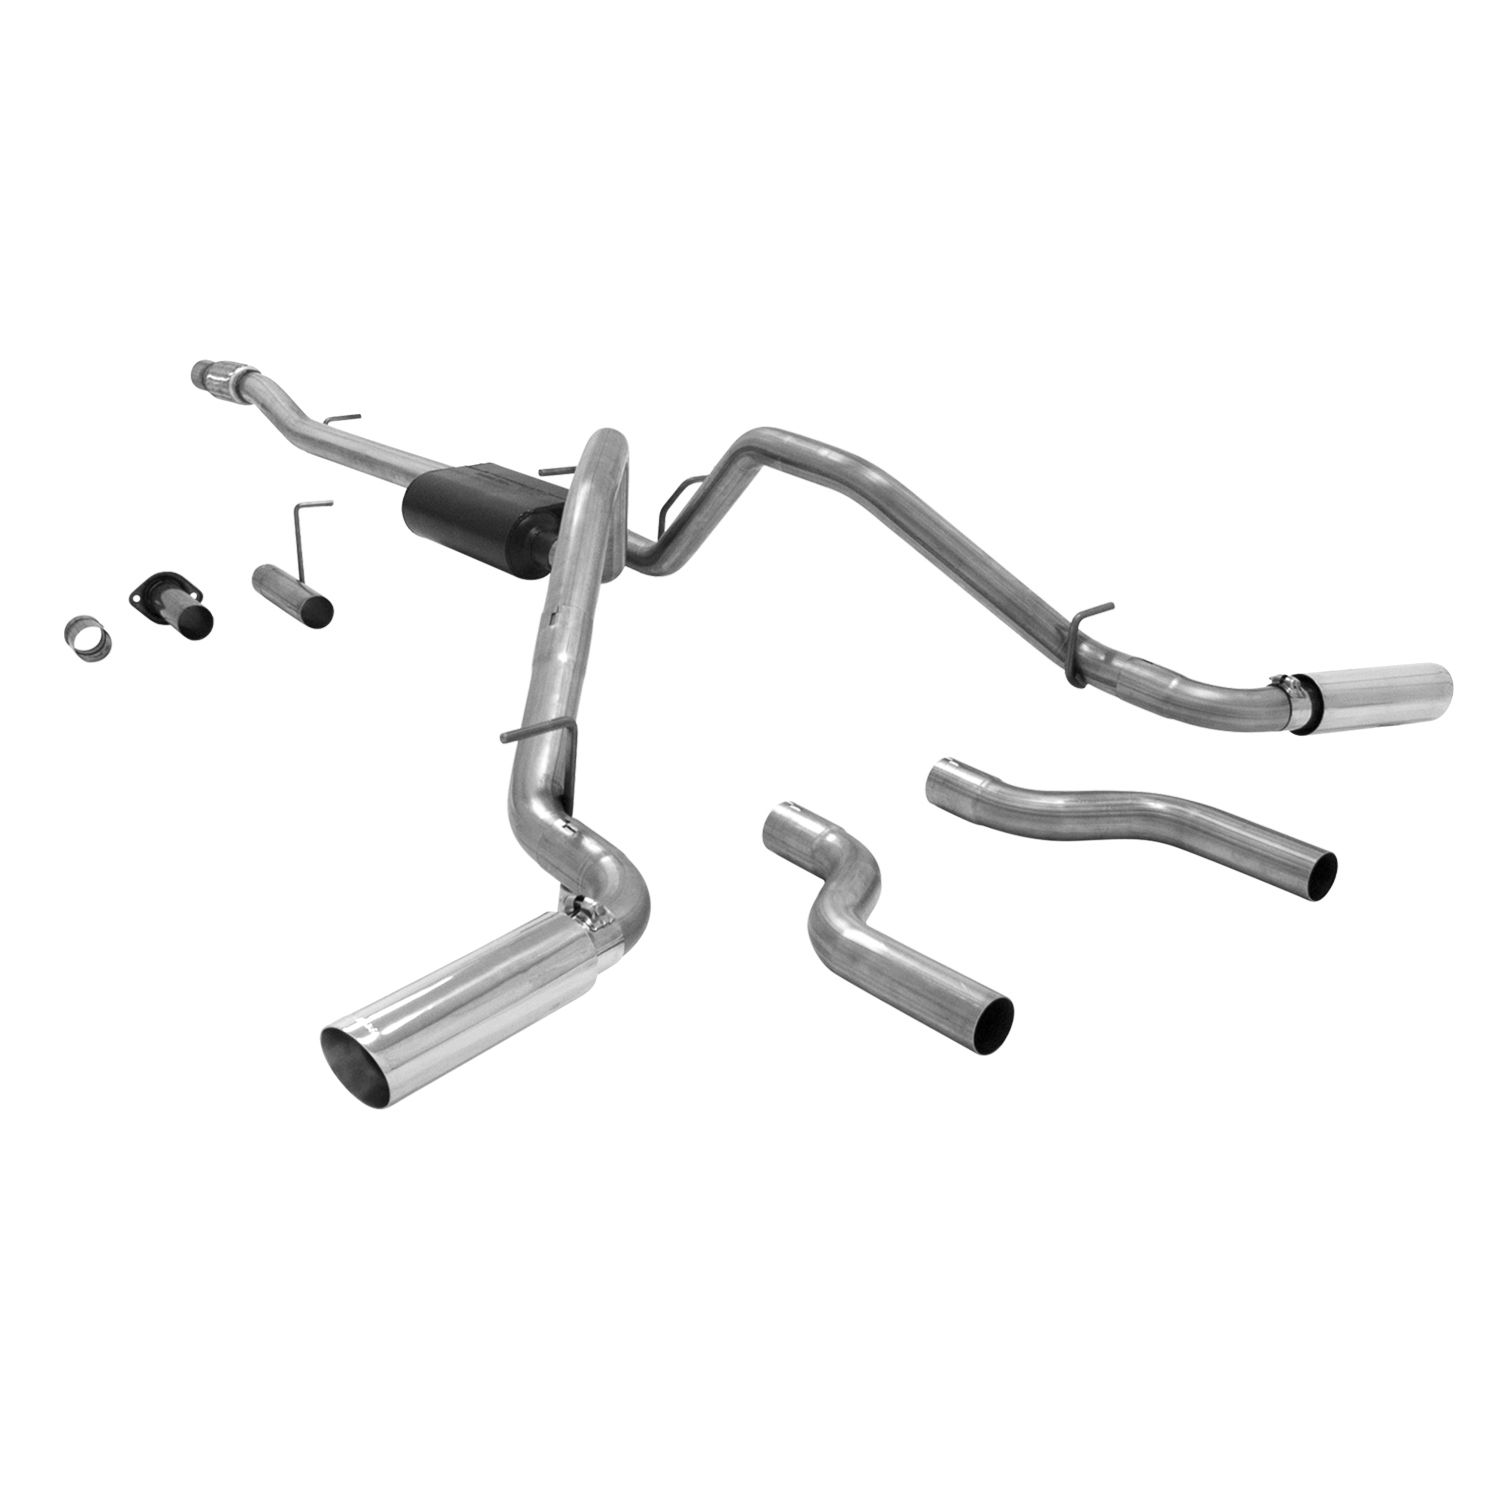 2007-2008 GMC Sierra 1500 4.8L 4DR Crew Cab/EXT Cab Flowmaster American Thunder Cat-Back Exhaust